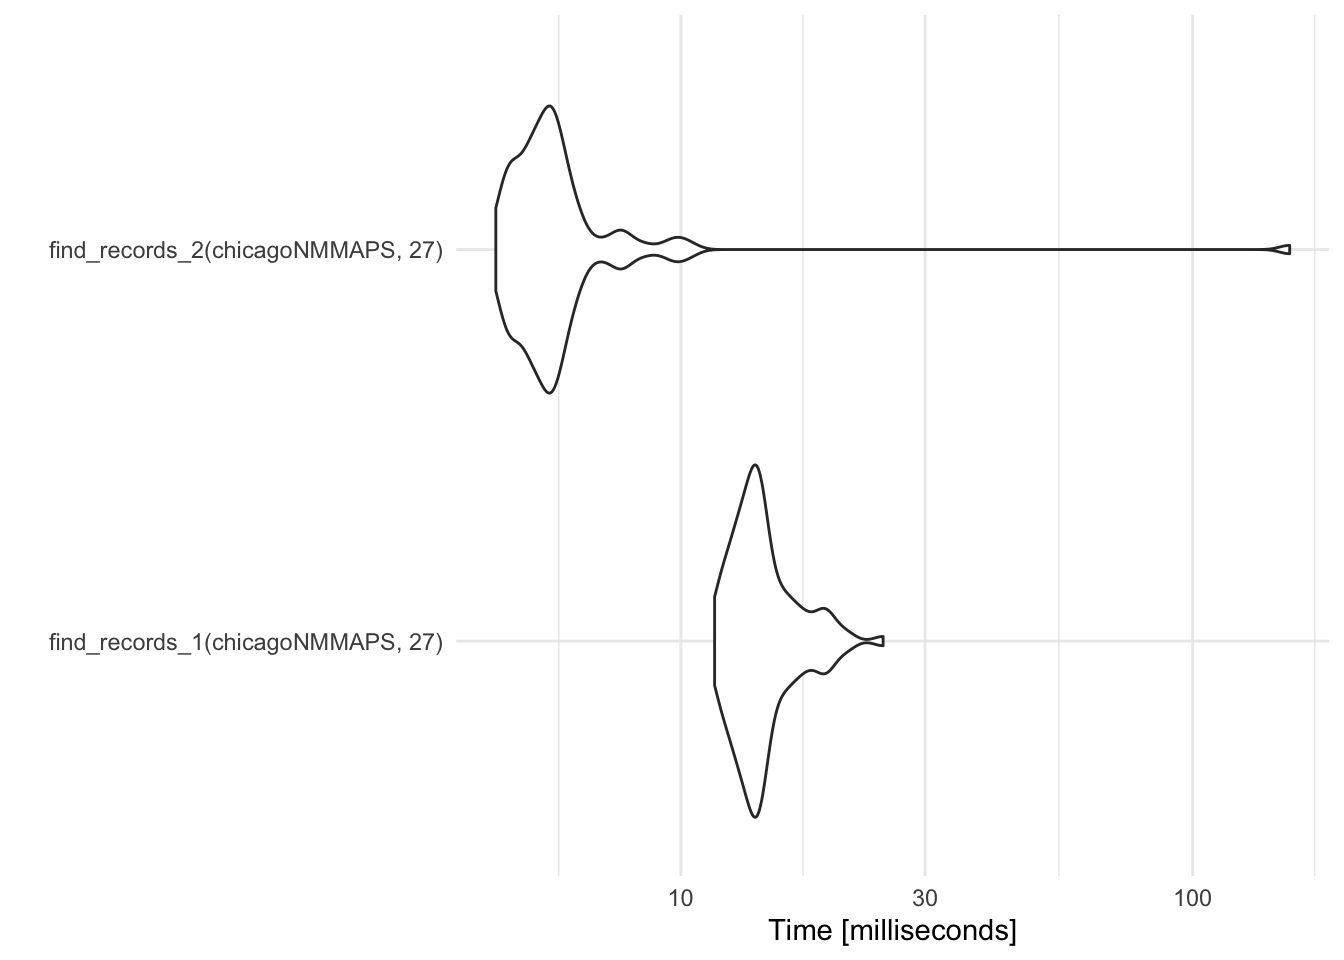 Timing comparison of find records functions